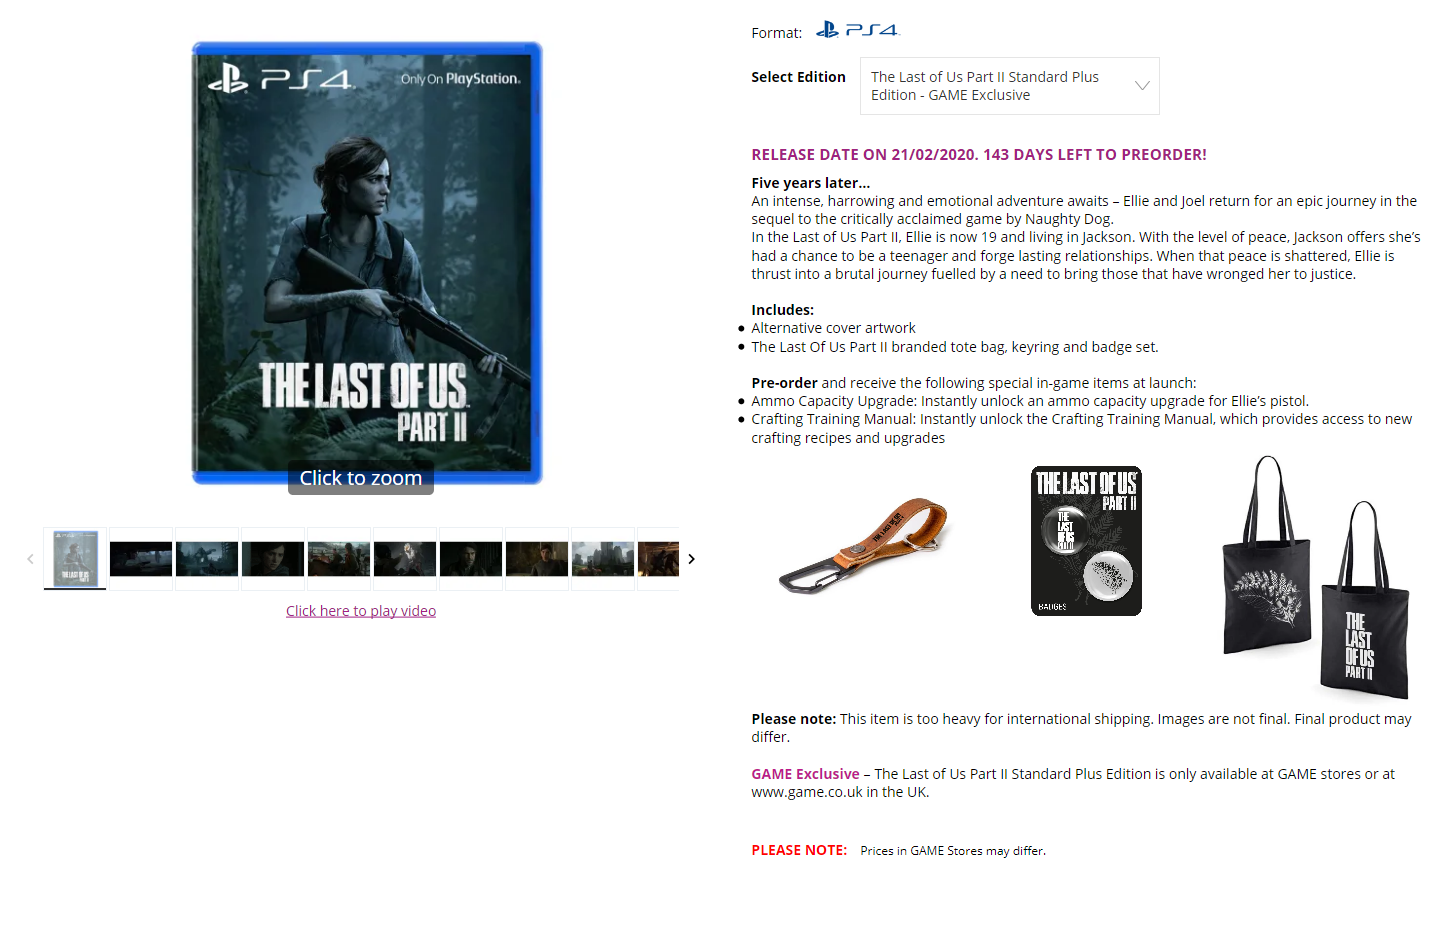 Screenshot_2019-10-01 The Last of Us Part II Standard Plus Edition - GAME Exclusive.png